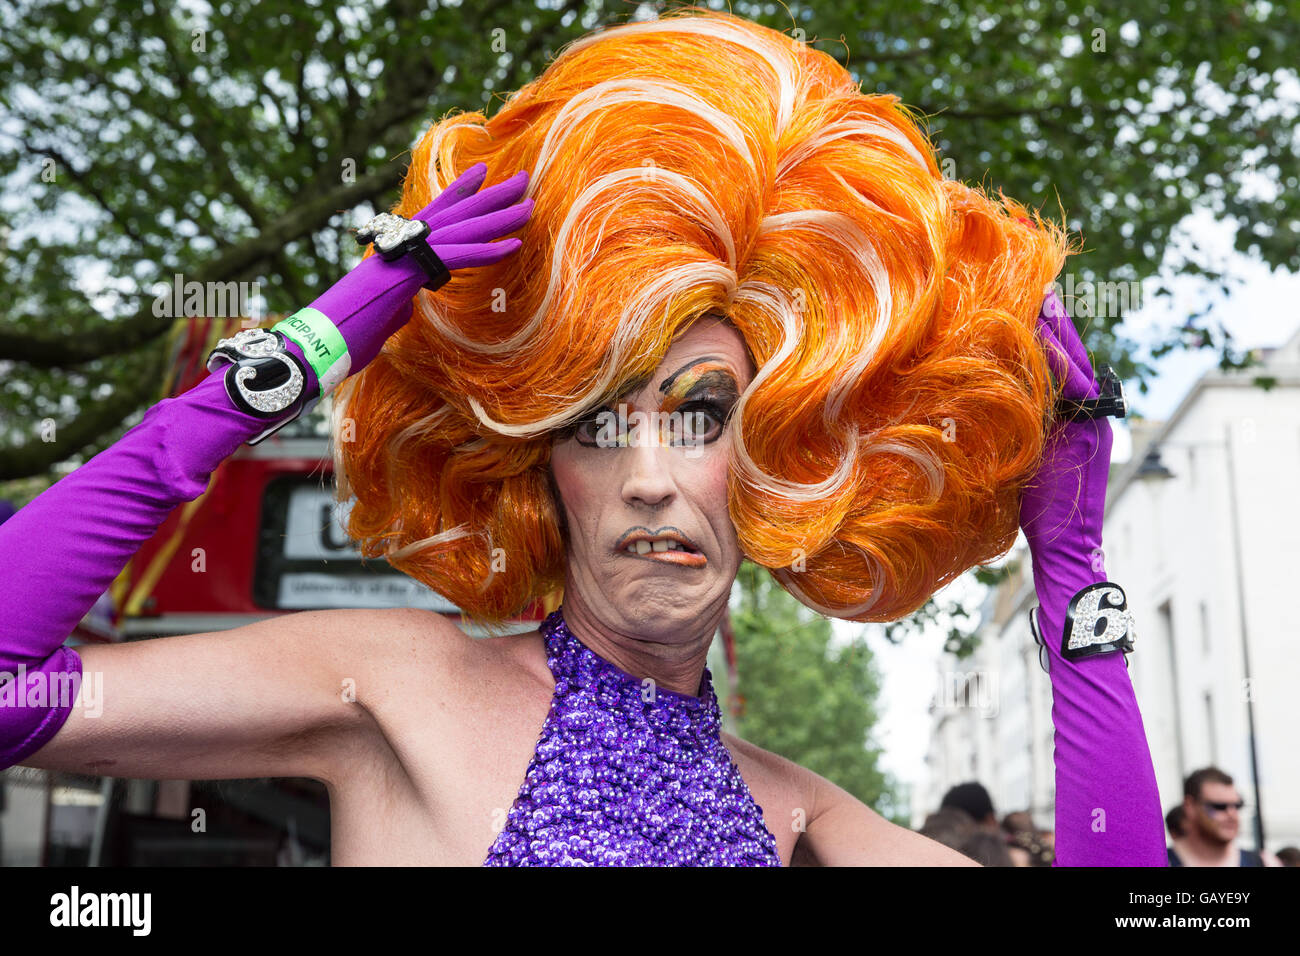 Colourful costumes at the Pride parade in London 2016.Fantastic orange wig on one of the participants Stock Photo